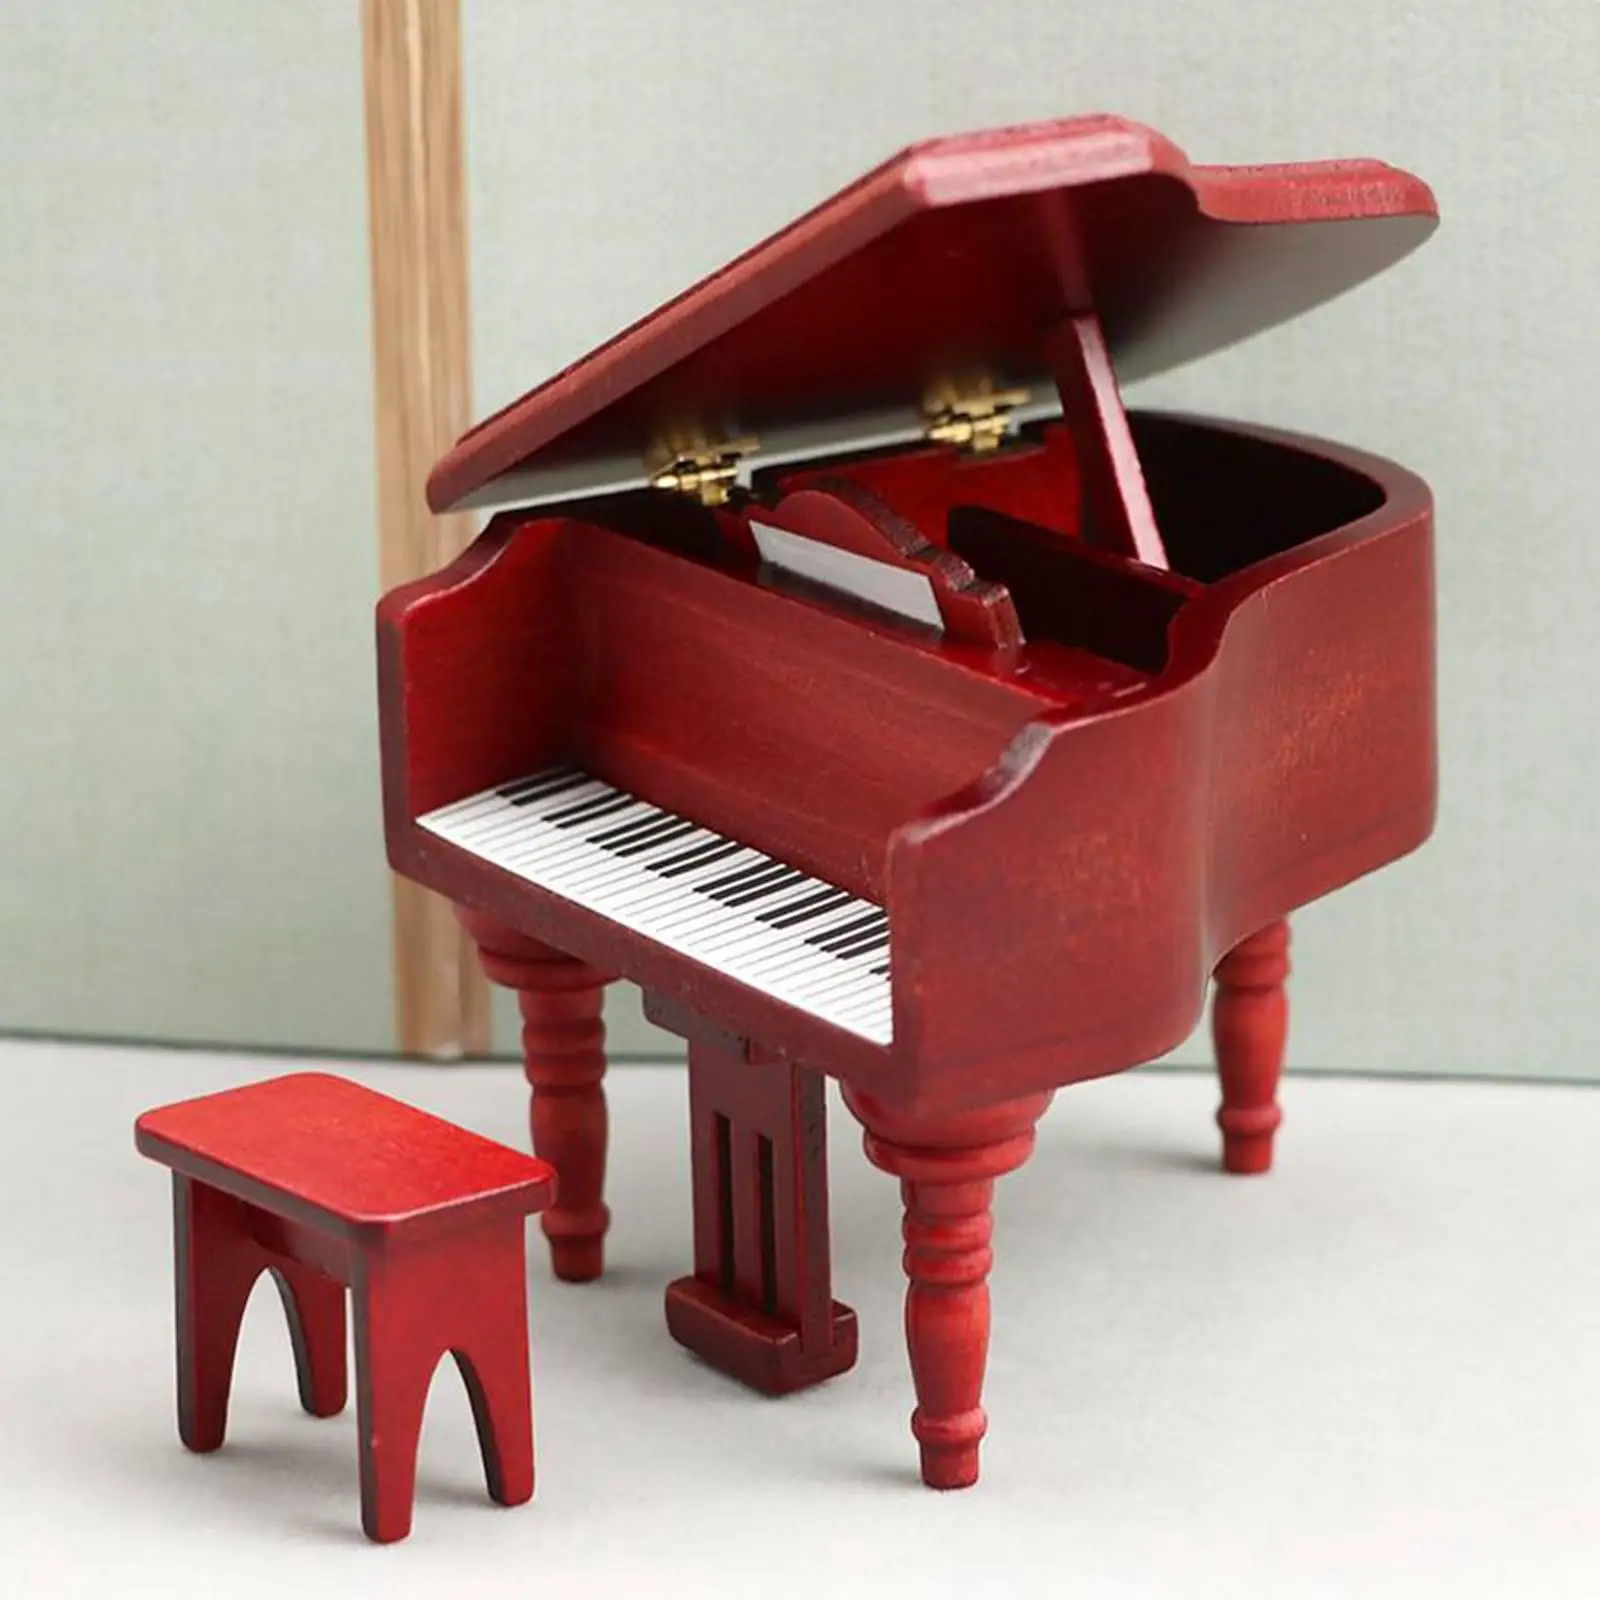 Piano with Chair Red Elegant for 1:12 Dollhouse DIY Projects Pretend Game Child